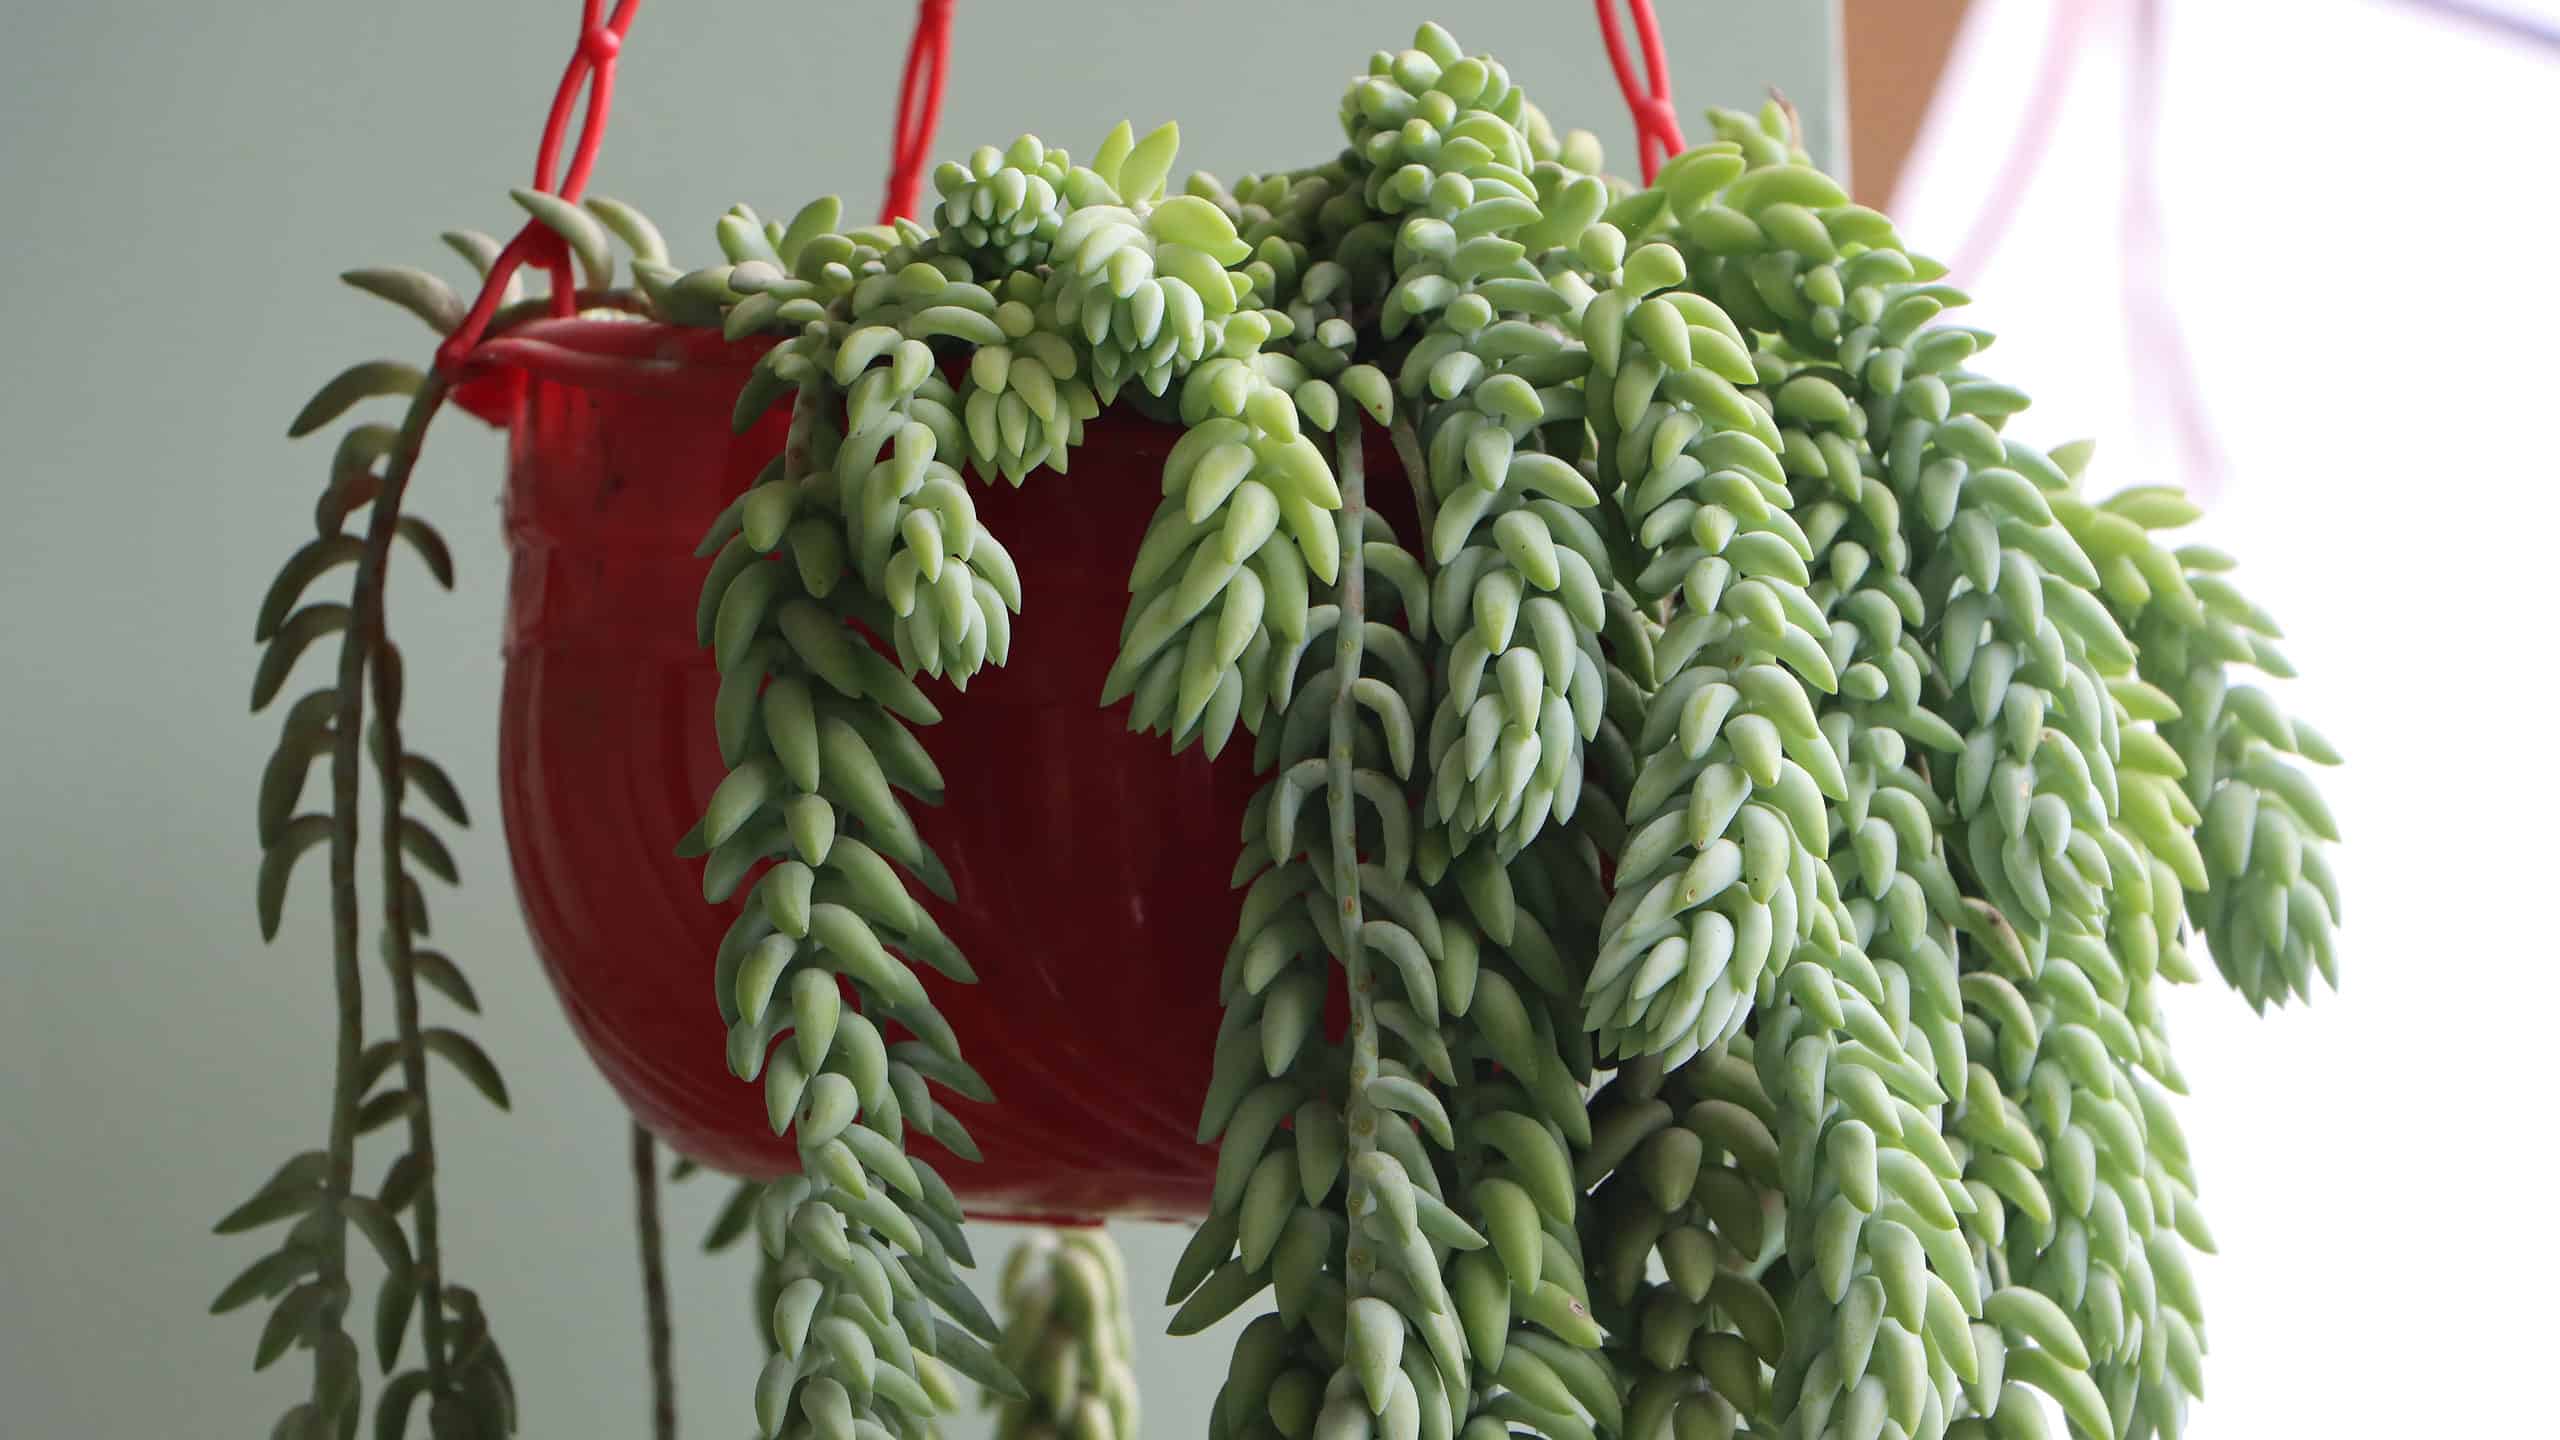 Donkey tail or burros tail plant in hanging basket.